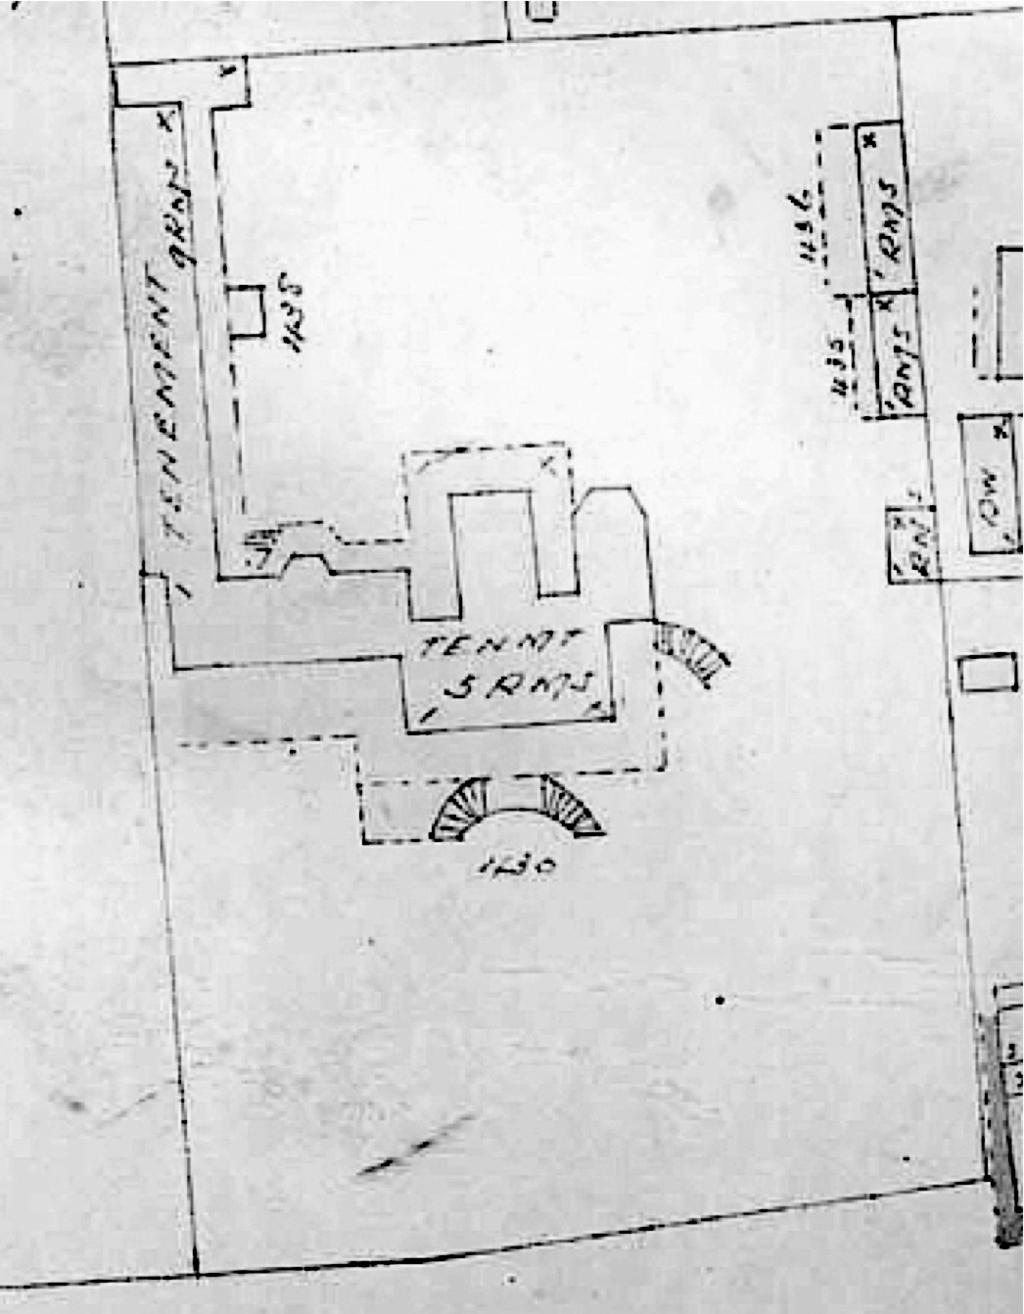 170 the hawaiian journal of history Figure 7. The most detailed drawing of Mu olaulani includes a depiction of the lānai and curved stairways. Inset of Dakin Fire Insurance Map, No. 21, 1906.